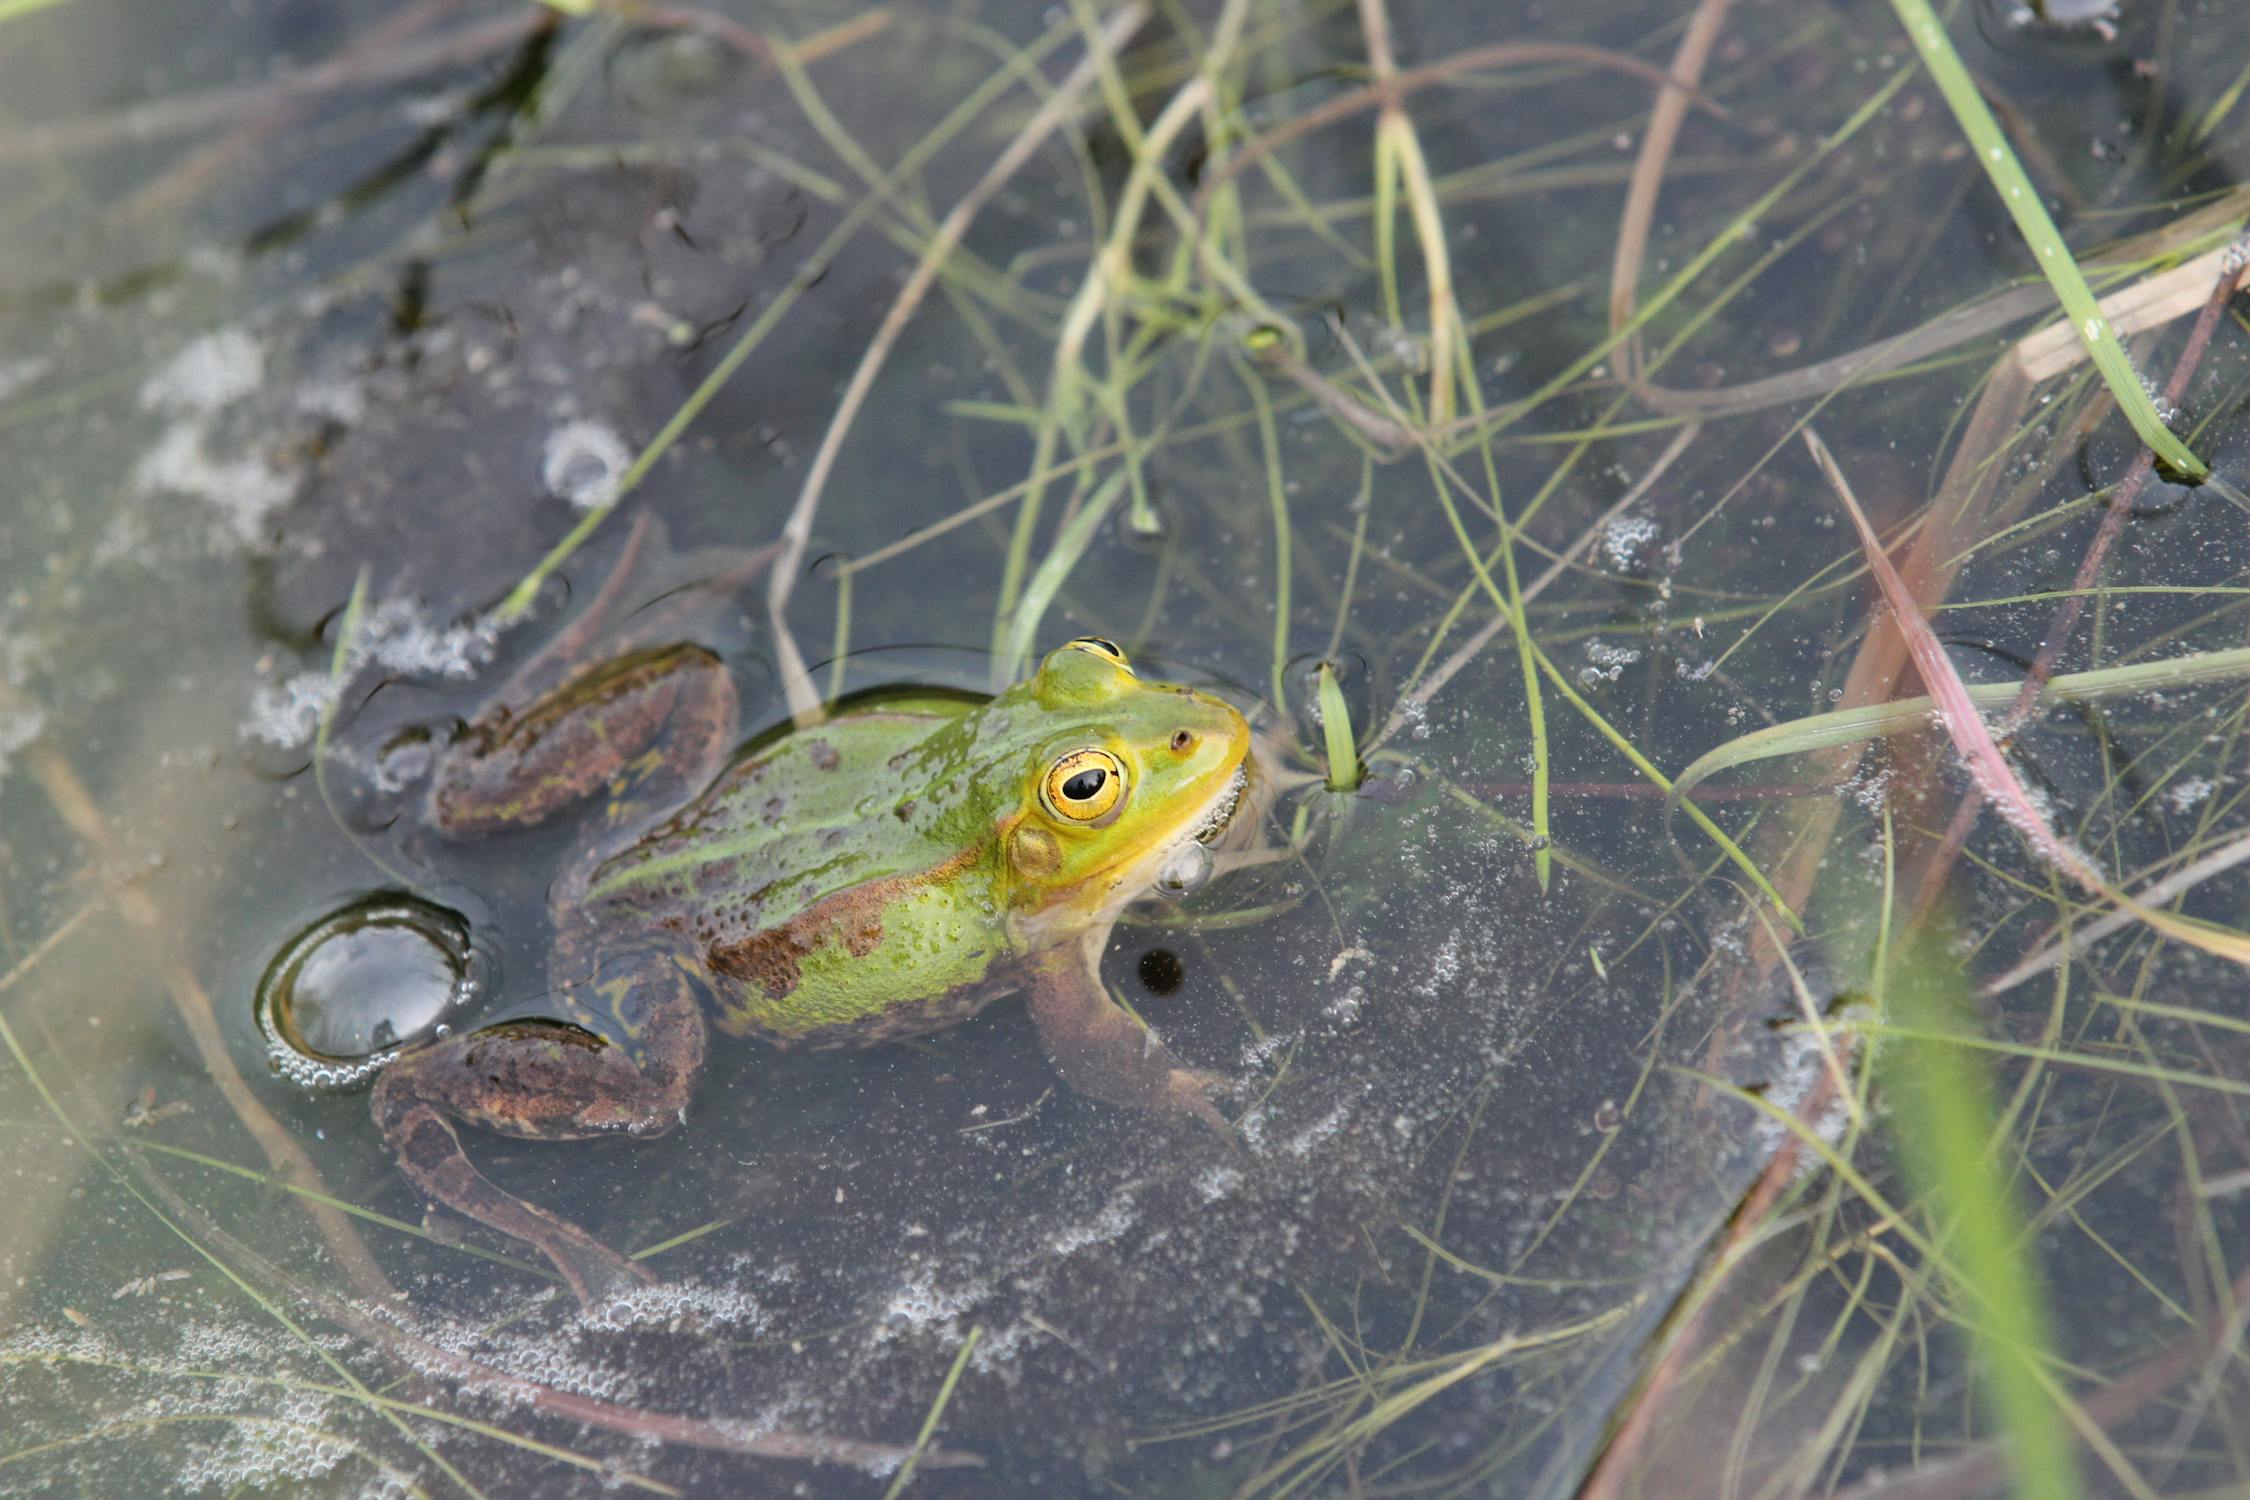 Frog Photo by Ann H from Pexels: https://www.pexels.com/photo/close-up-shot-of-a-green-frog-11476420/